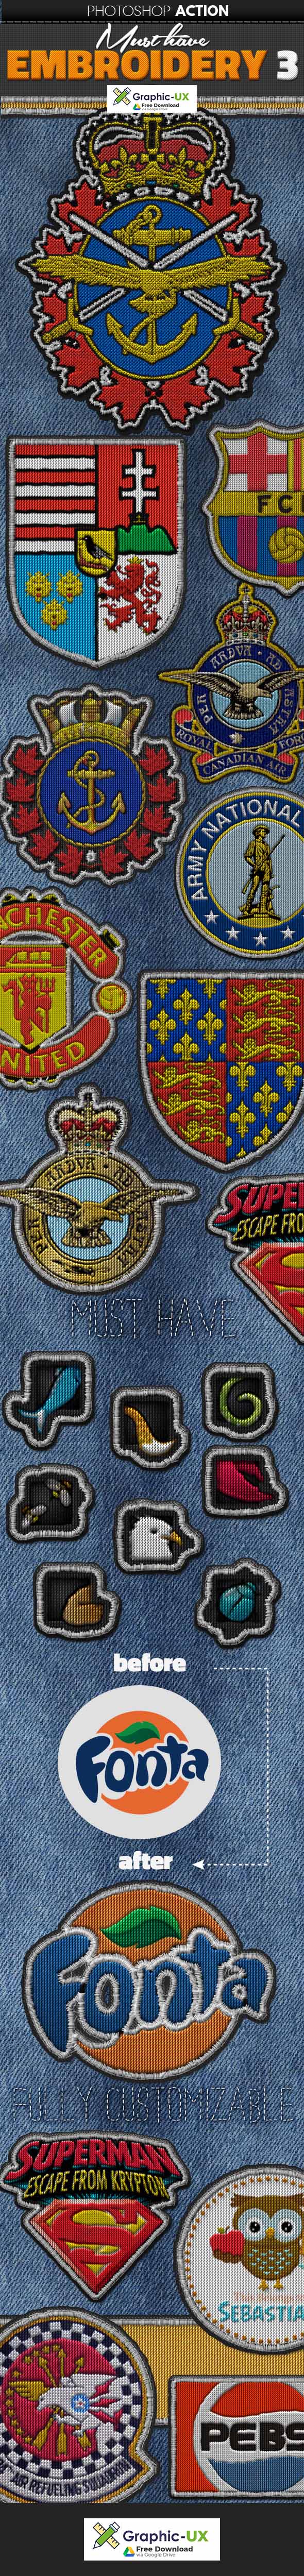 Embroidered Logo Badge Photoshop Action 